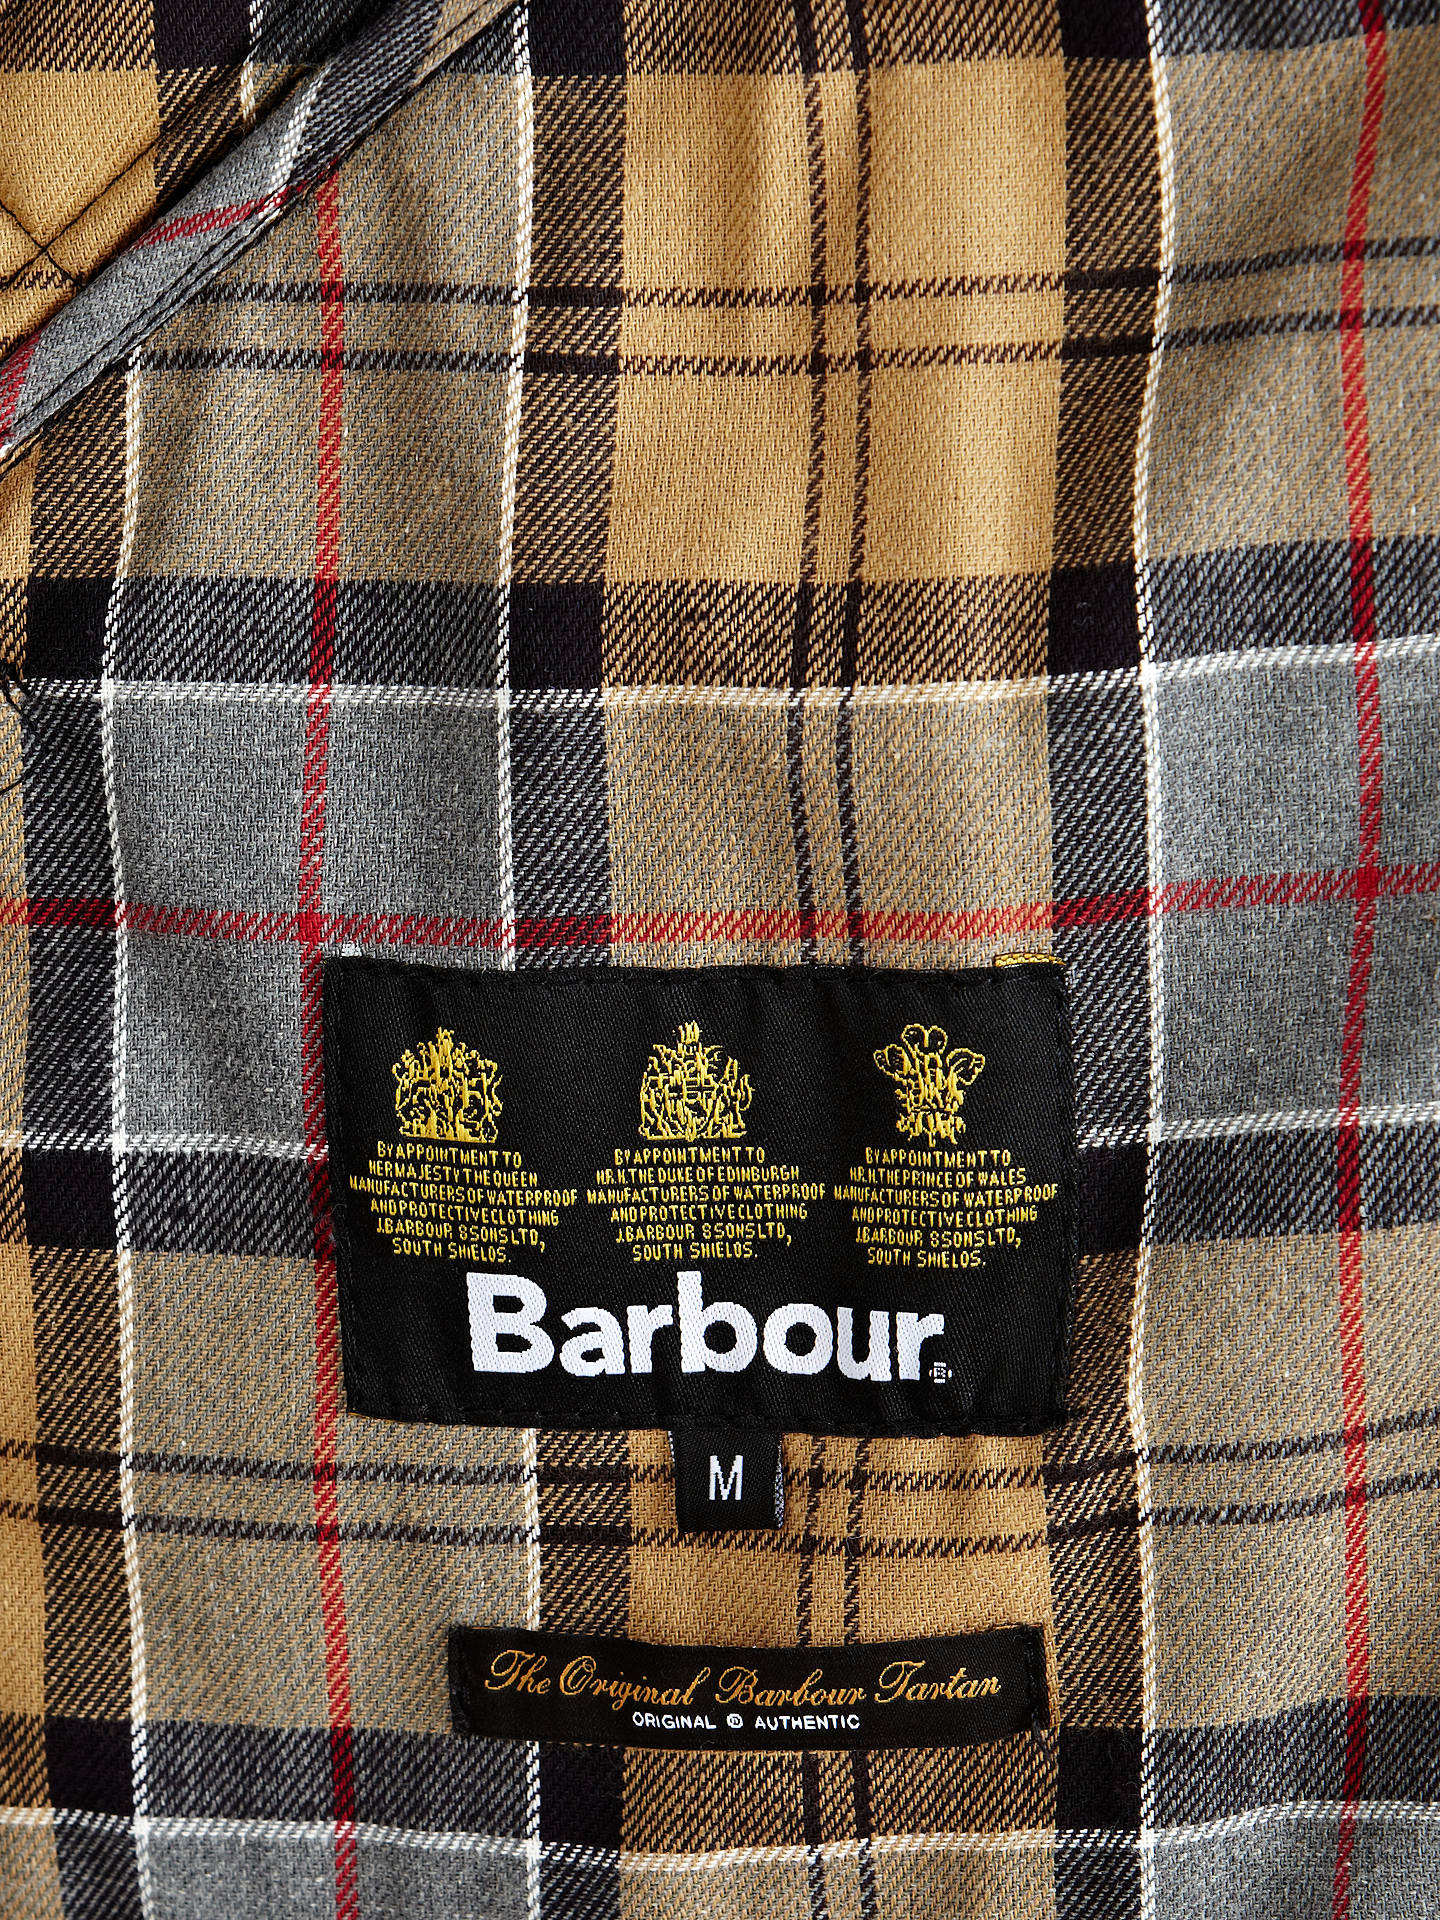 Barbour Waxed Quilted Funnel Neck Jacket, Black at John Lewis & Partners